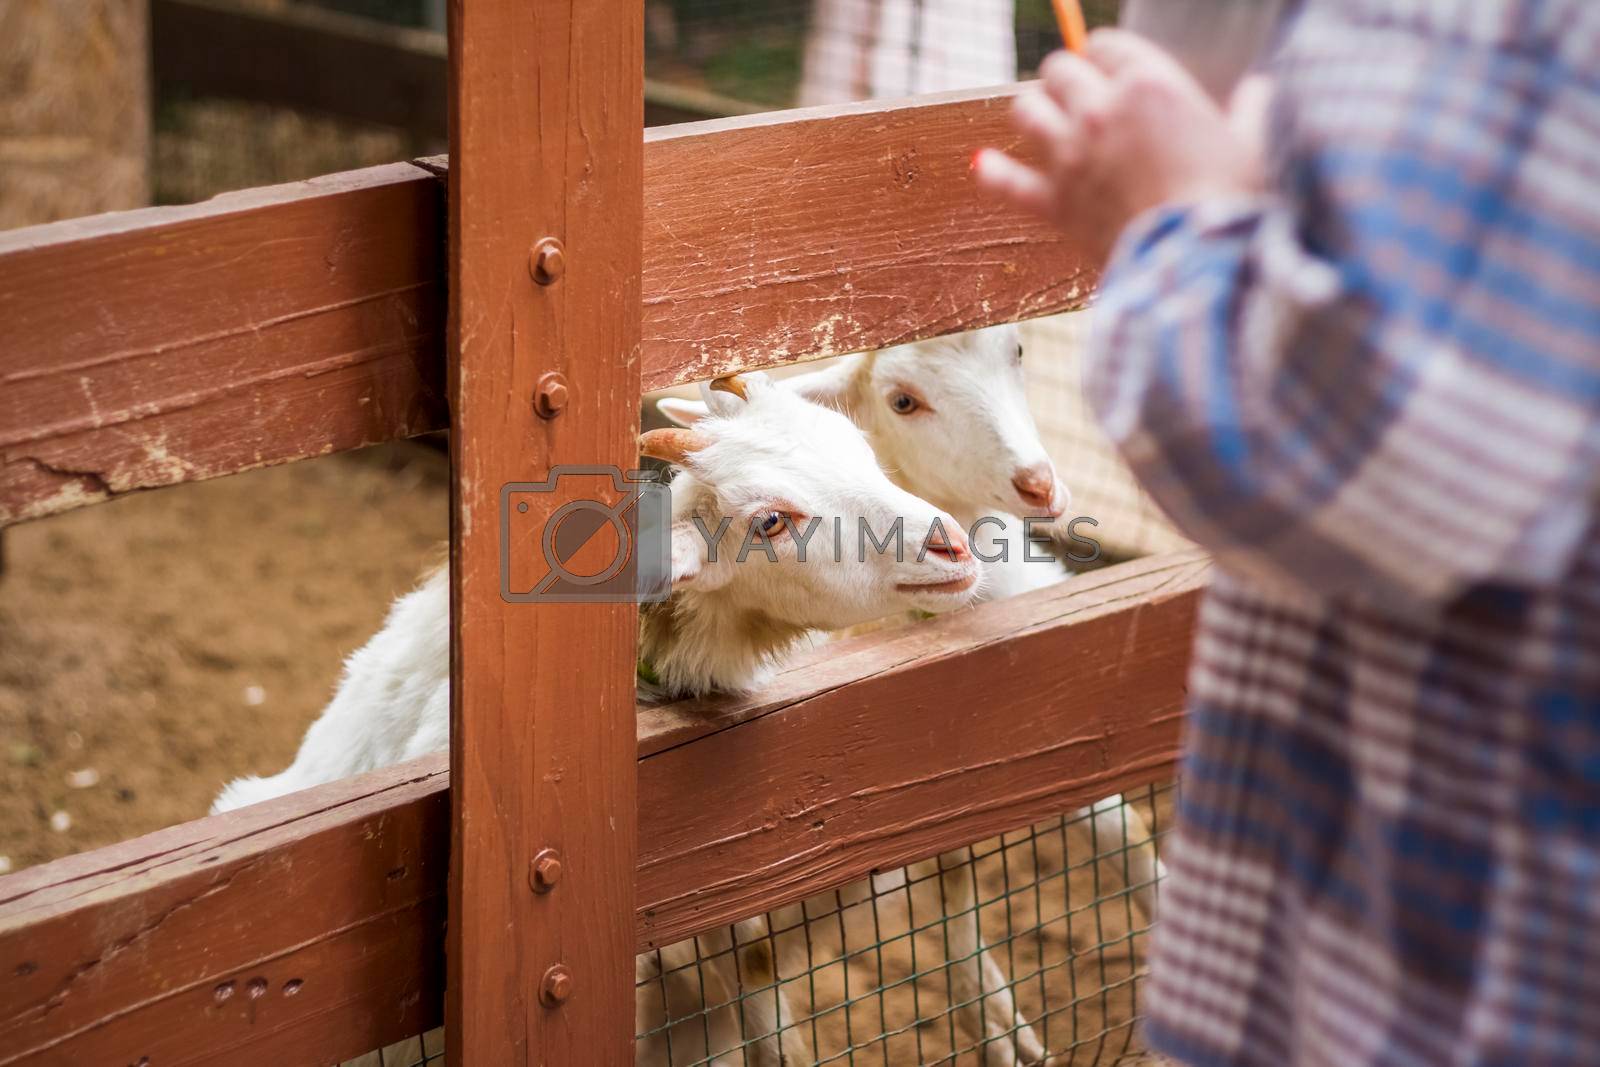 Animals in an aviary in a small city zoo. Animals are fed from the hands of visitors, and children can pet them. Horse, sheep, sheep, animals